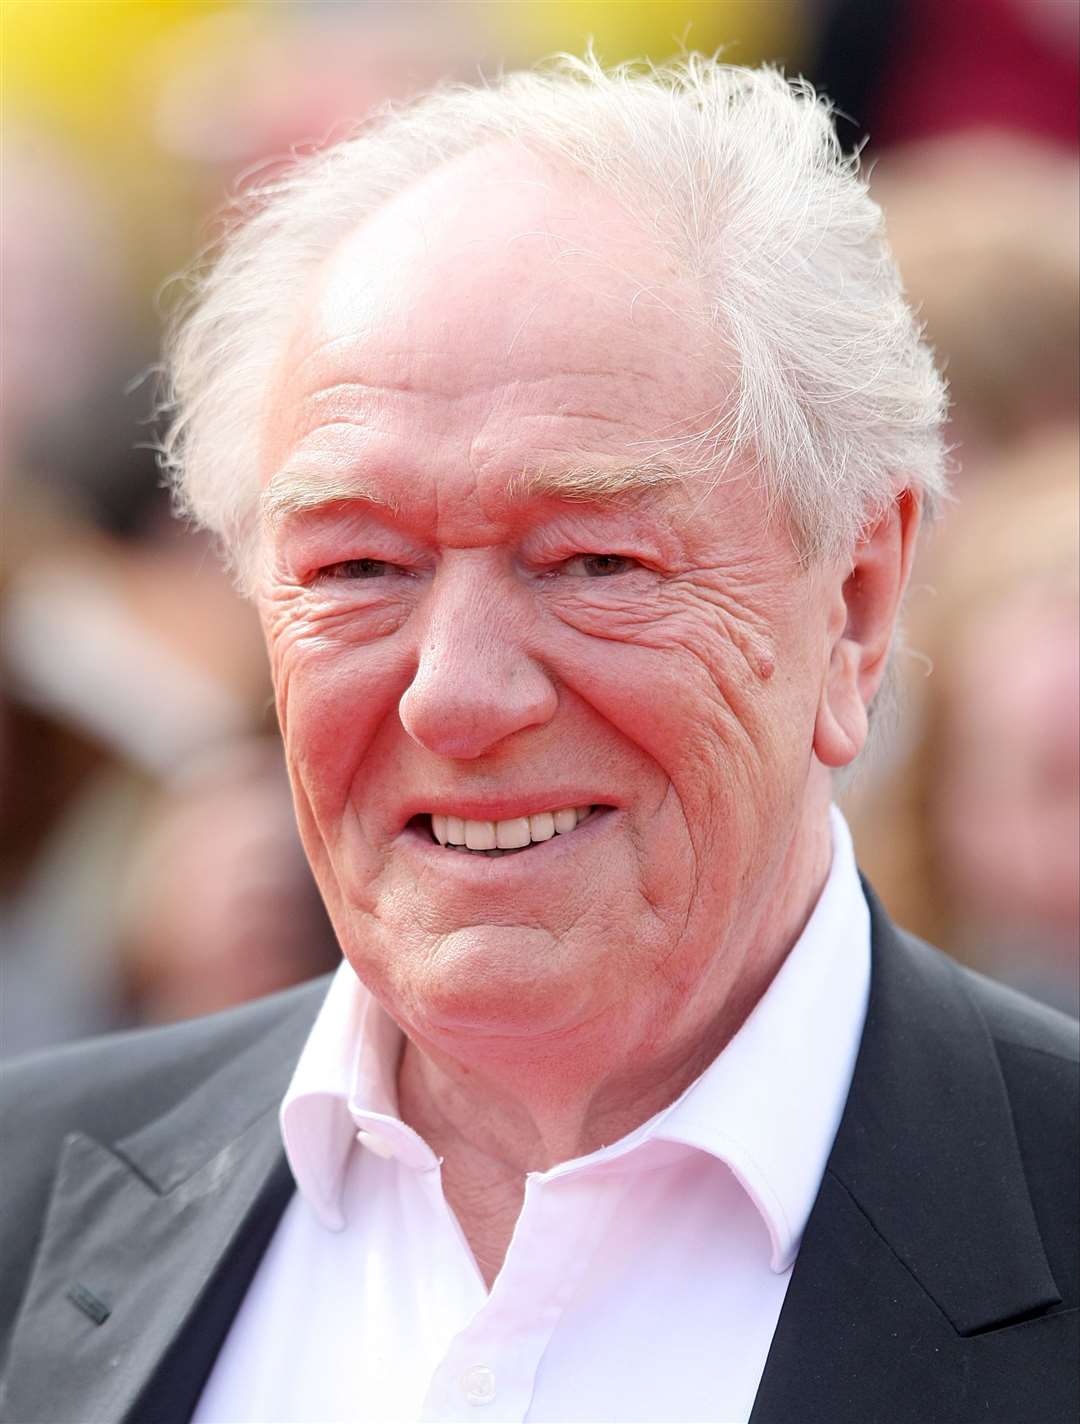 Michael Gambon arriving for the world premiere of Harry Potter And The Deathly Hallows: Part 2.